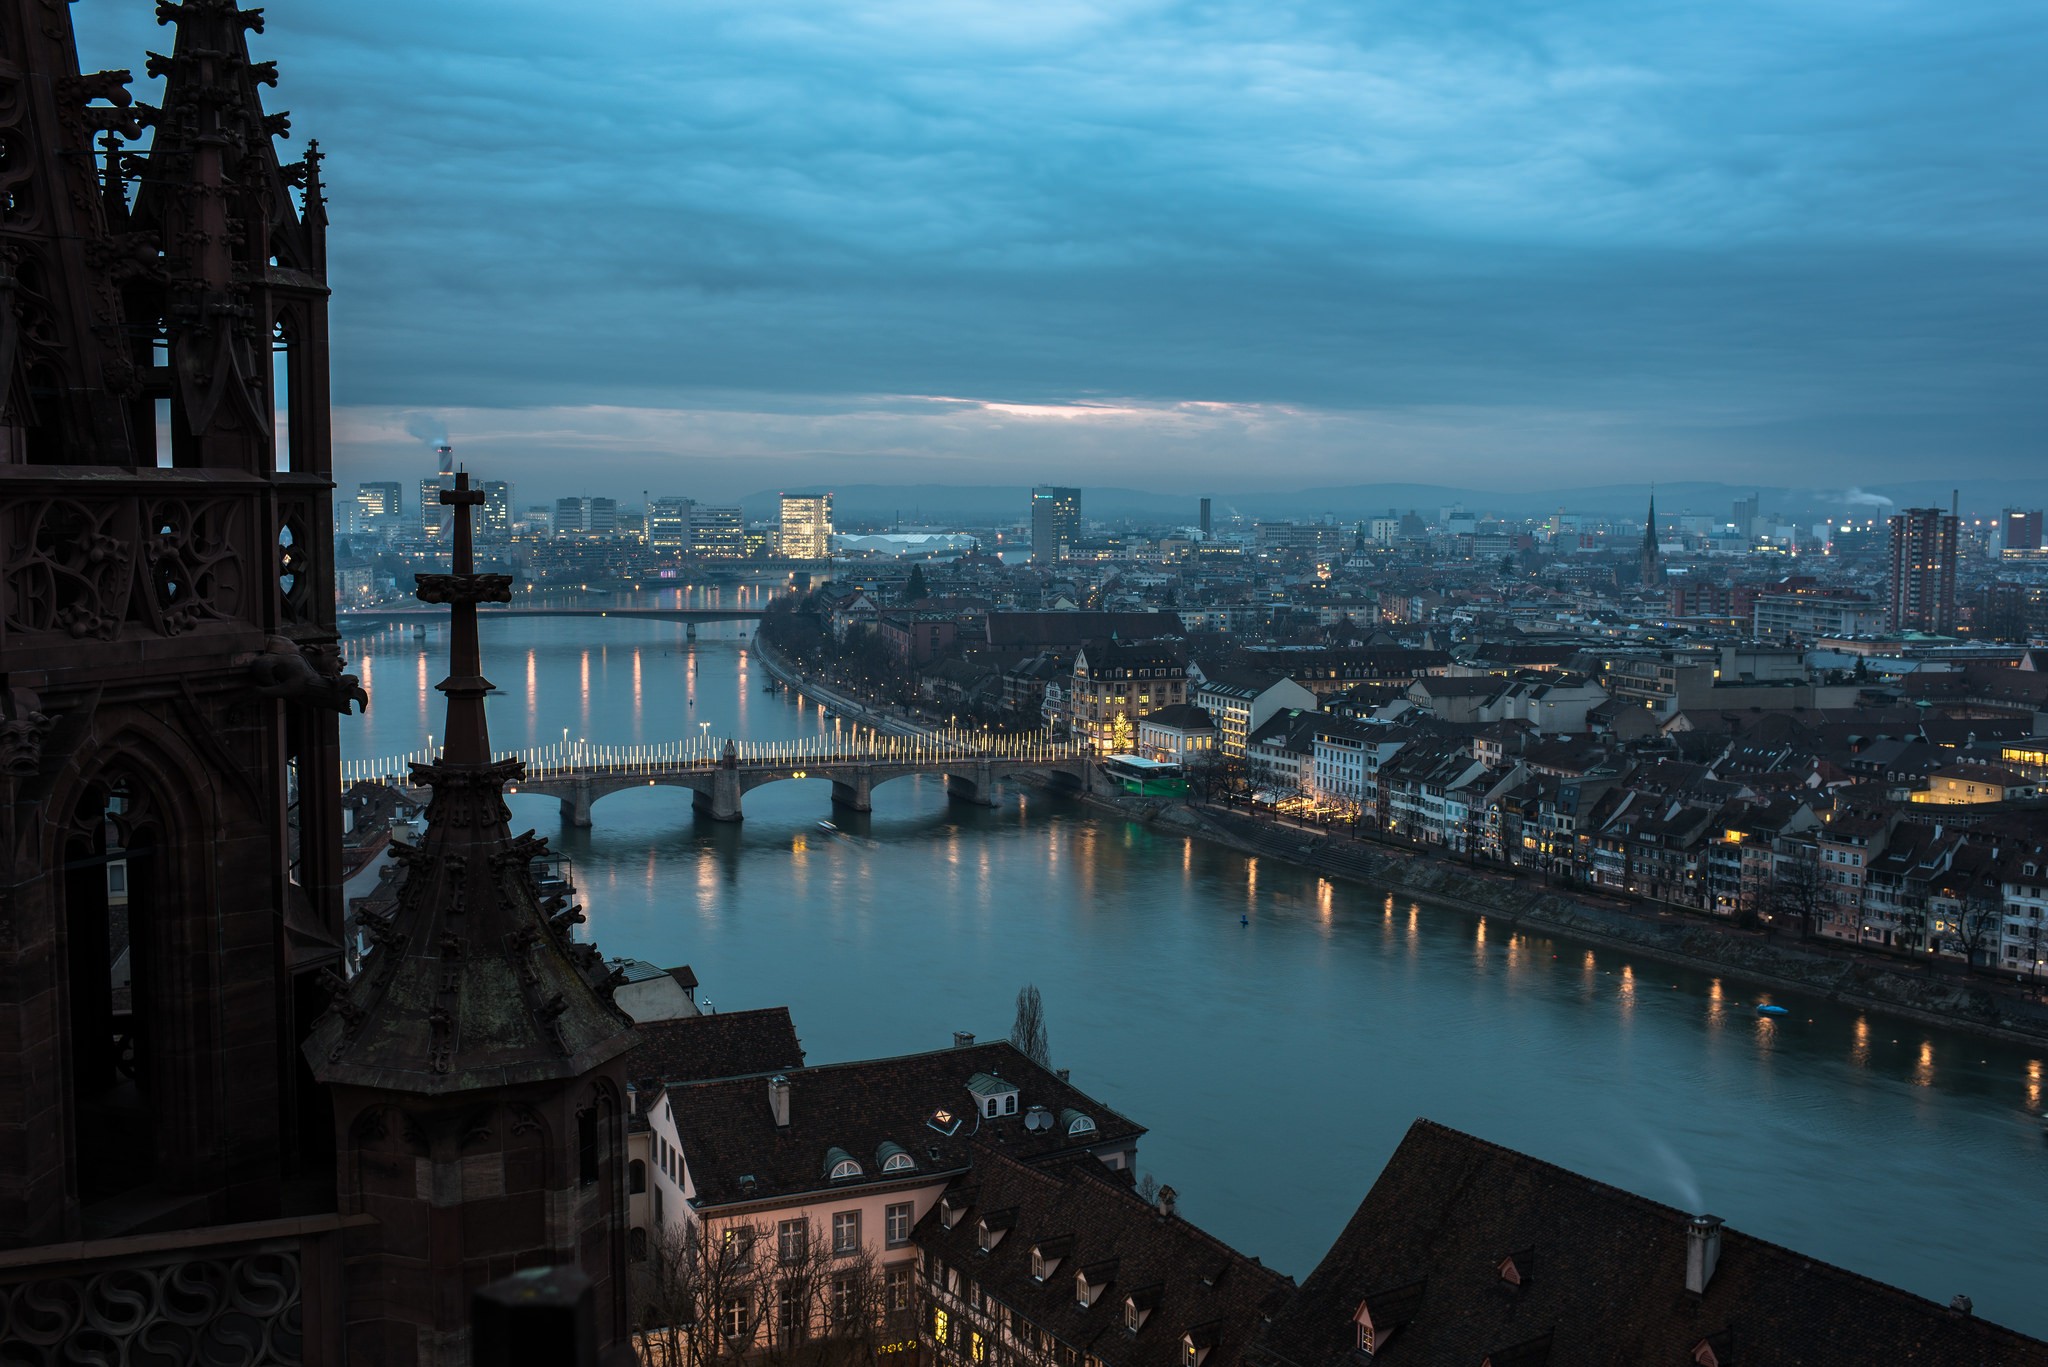 General 2048x1367 city basel river dusk overcast Switzerland cityscape clouds bridge cathedral building